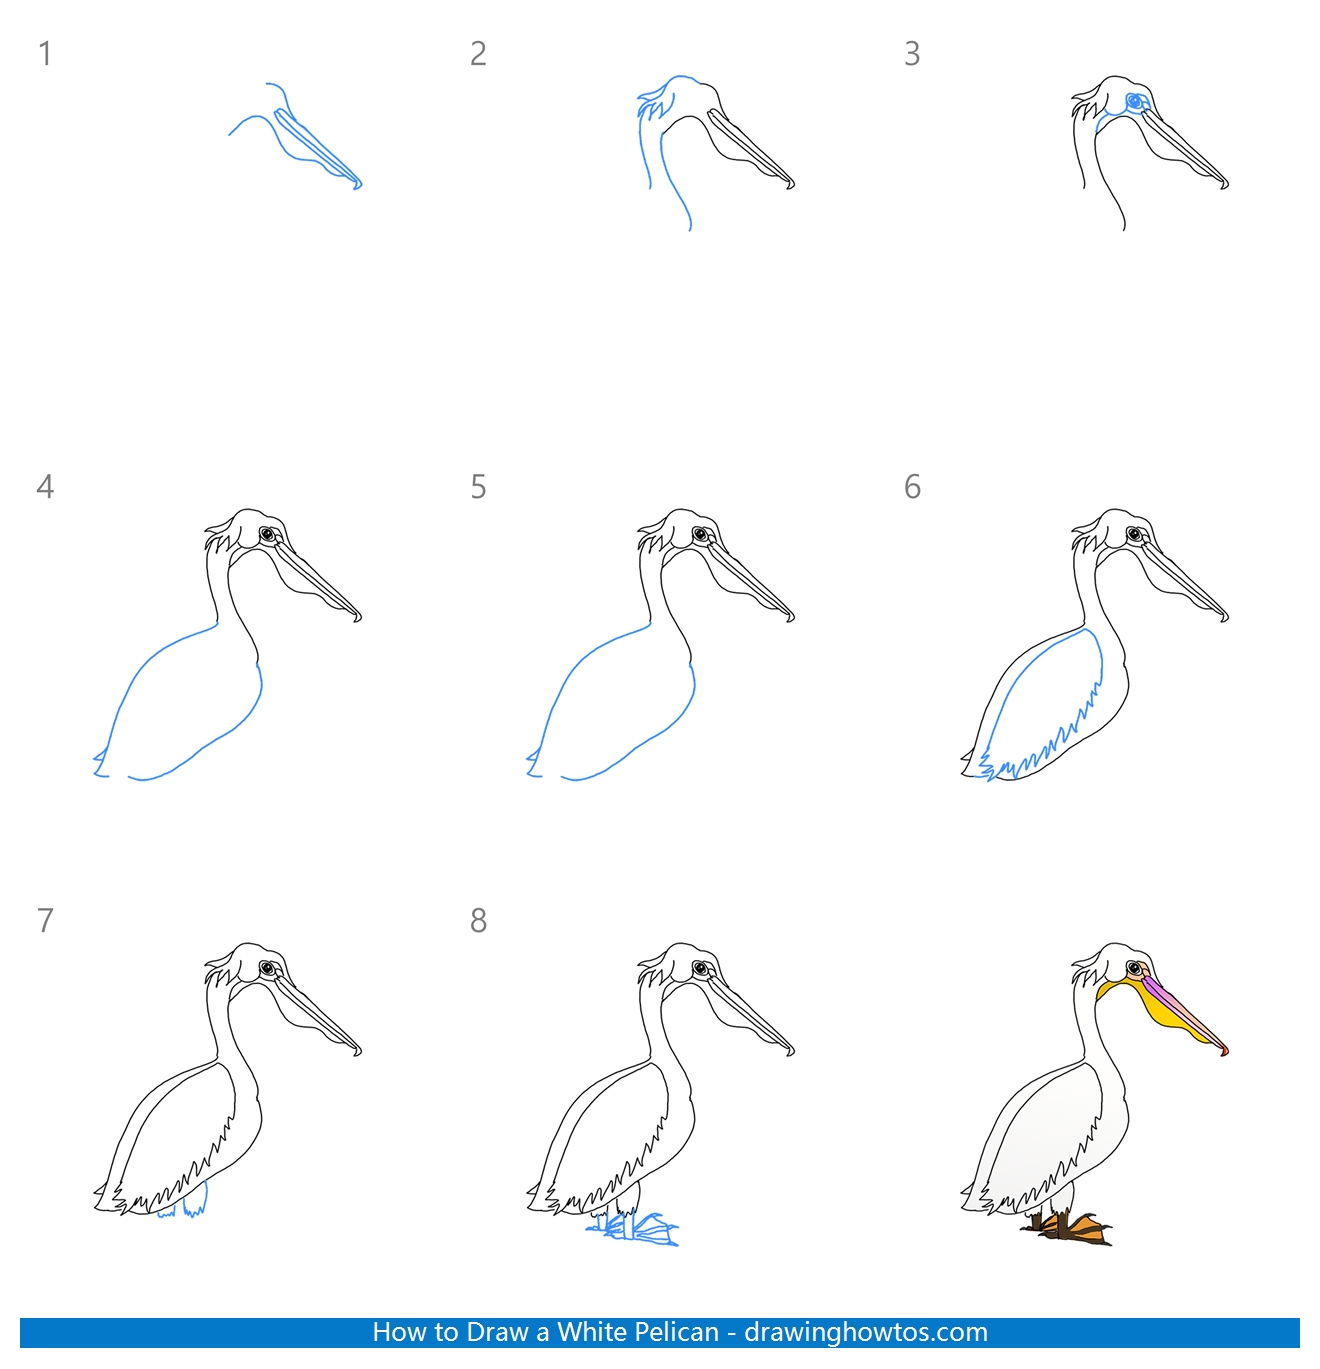 How to Draw a White Pelican Step by Step